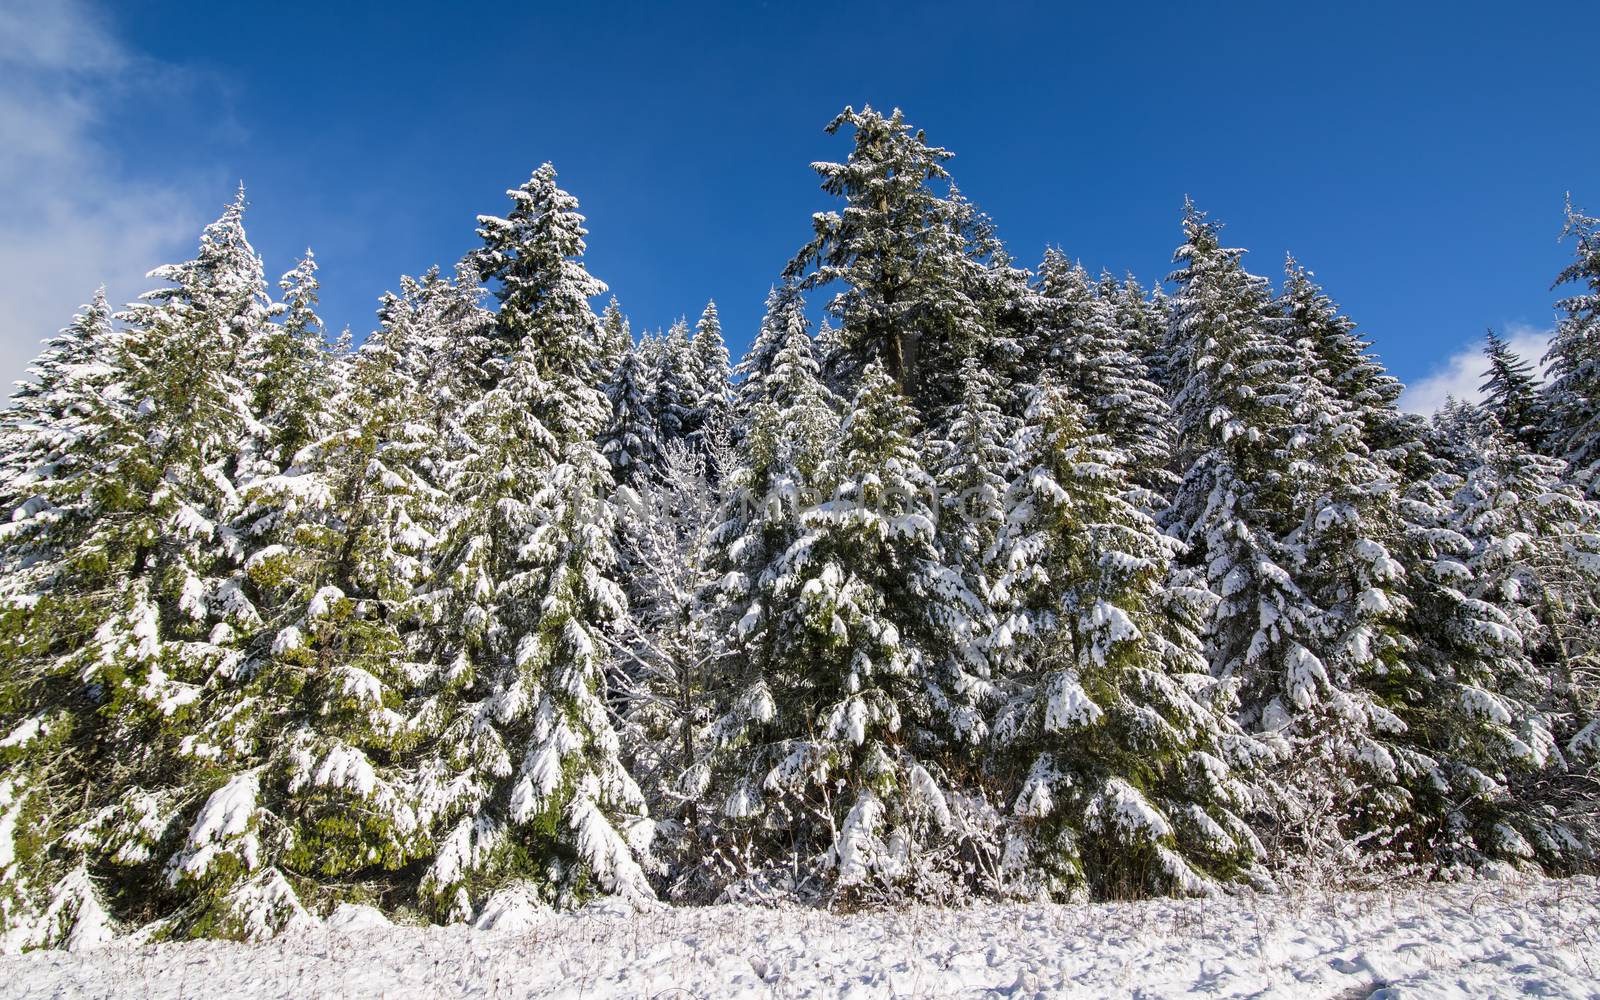 Snow-Covered Trees Under Blue Skies and Clouds by backyard_photography